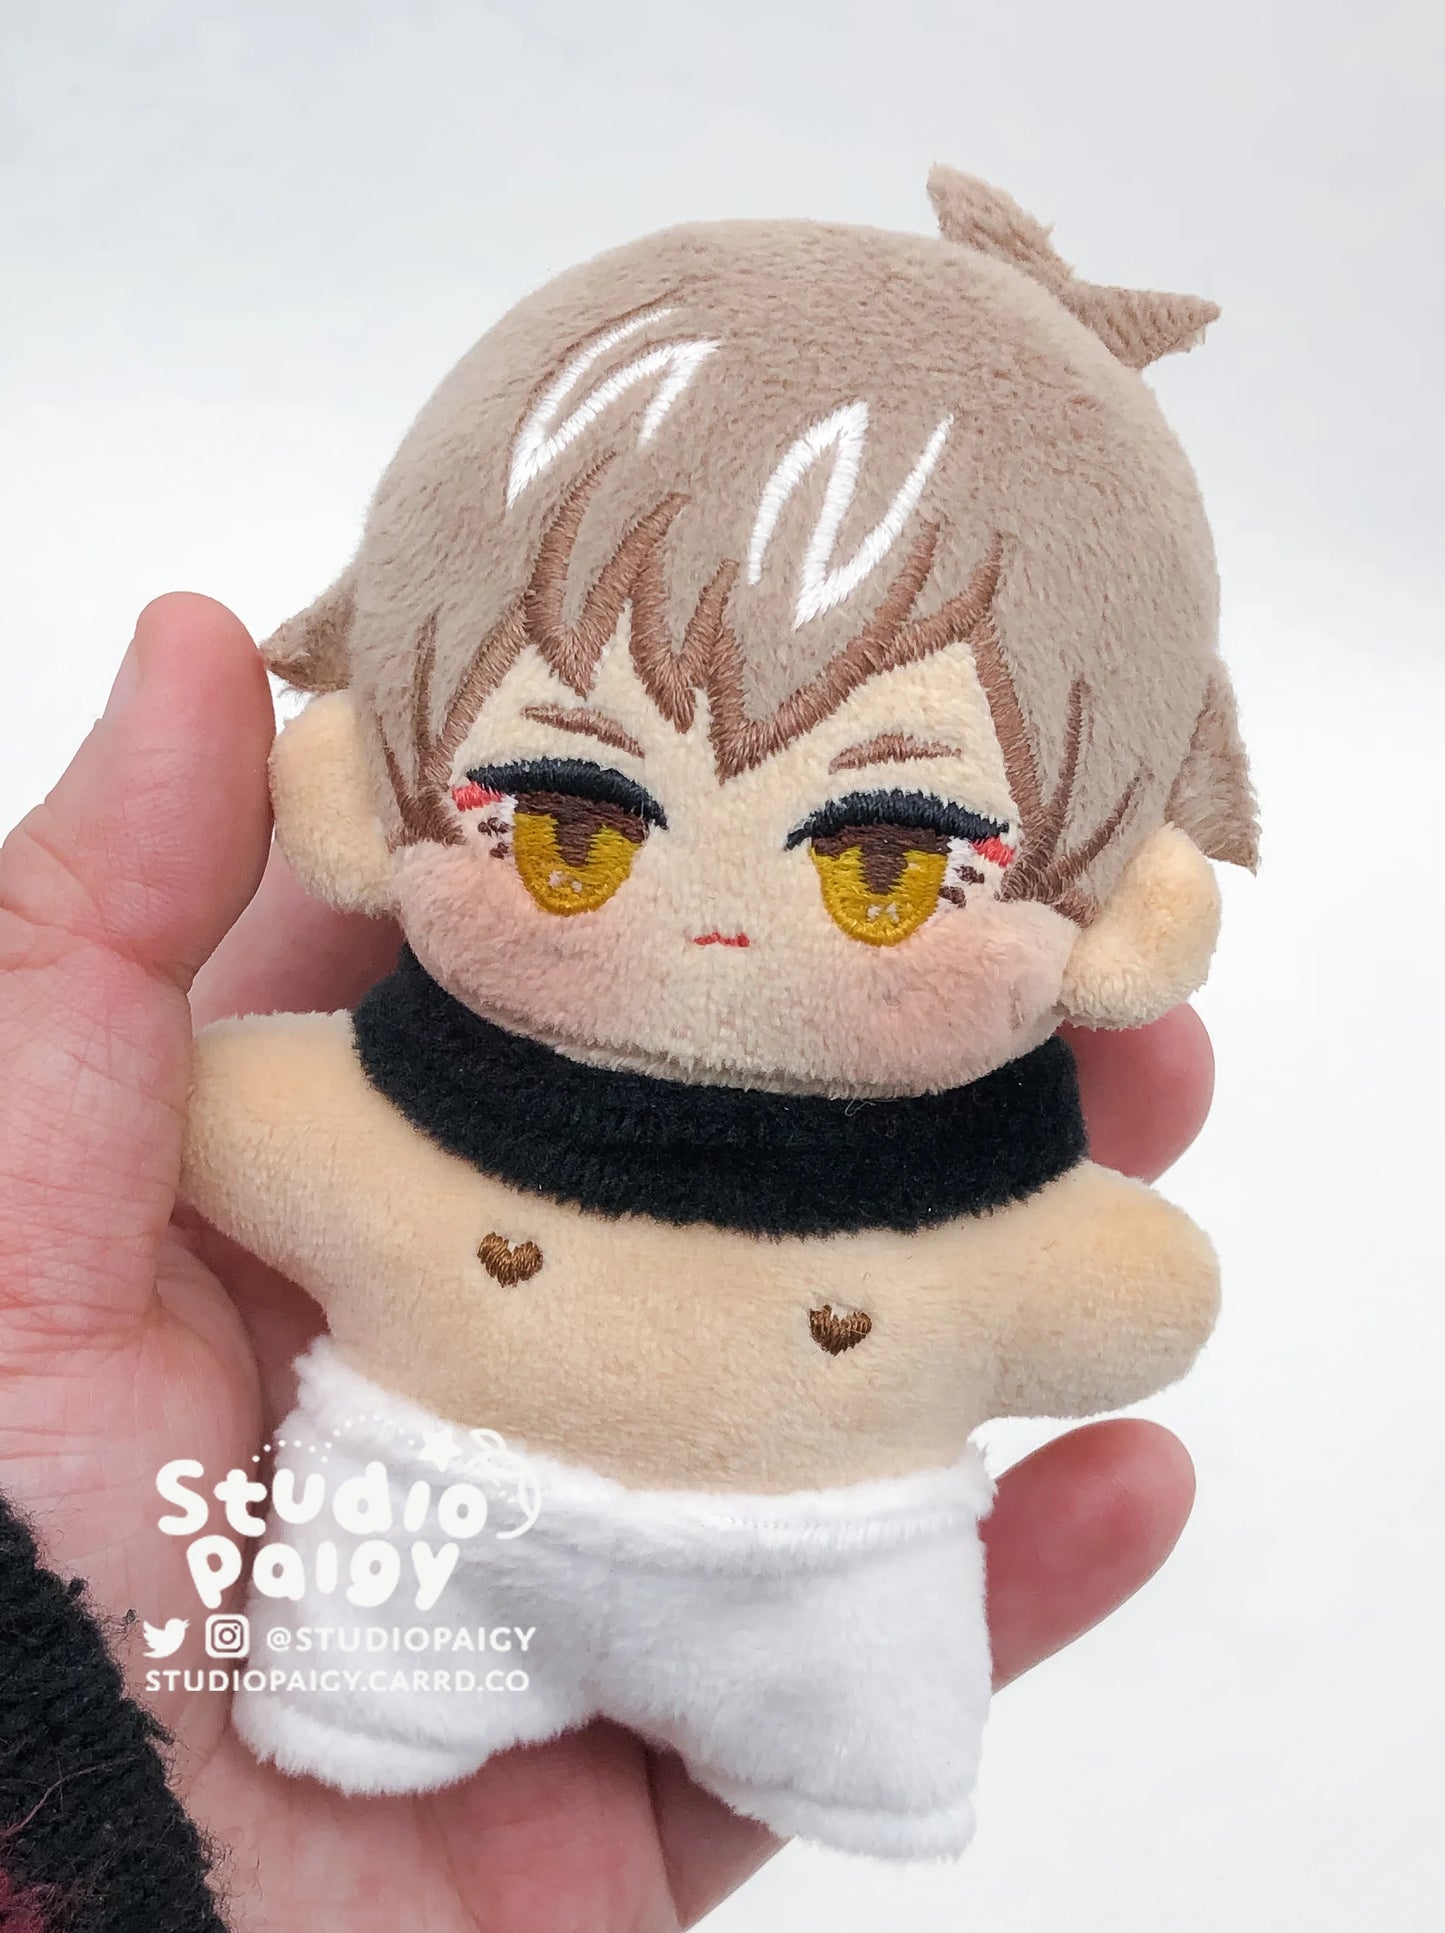 BL, Juda and Daato Omegaverse, 10cm Doll plushies